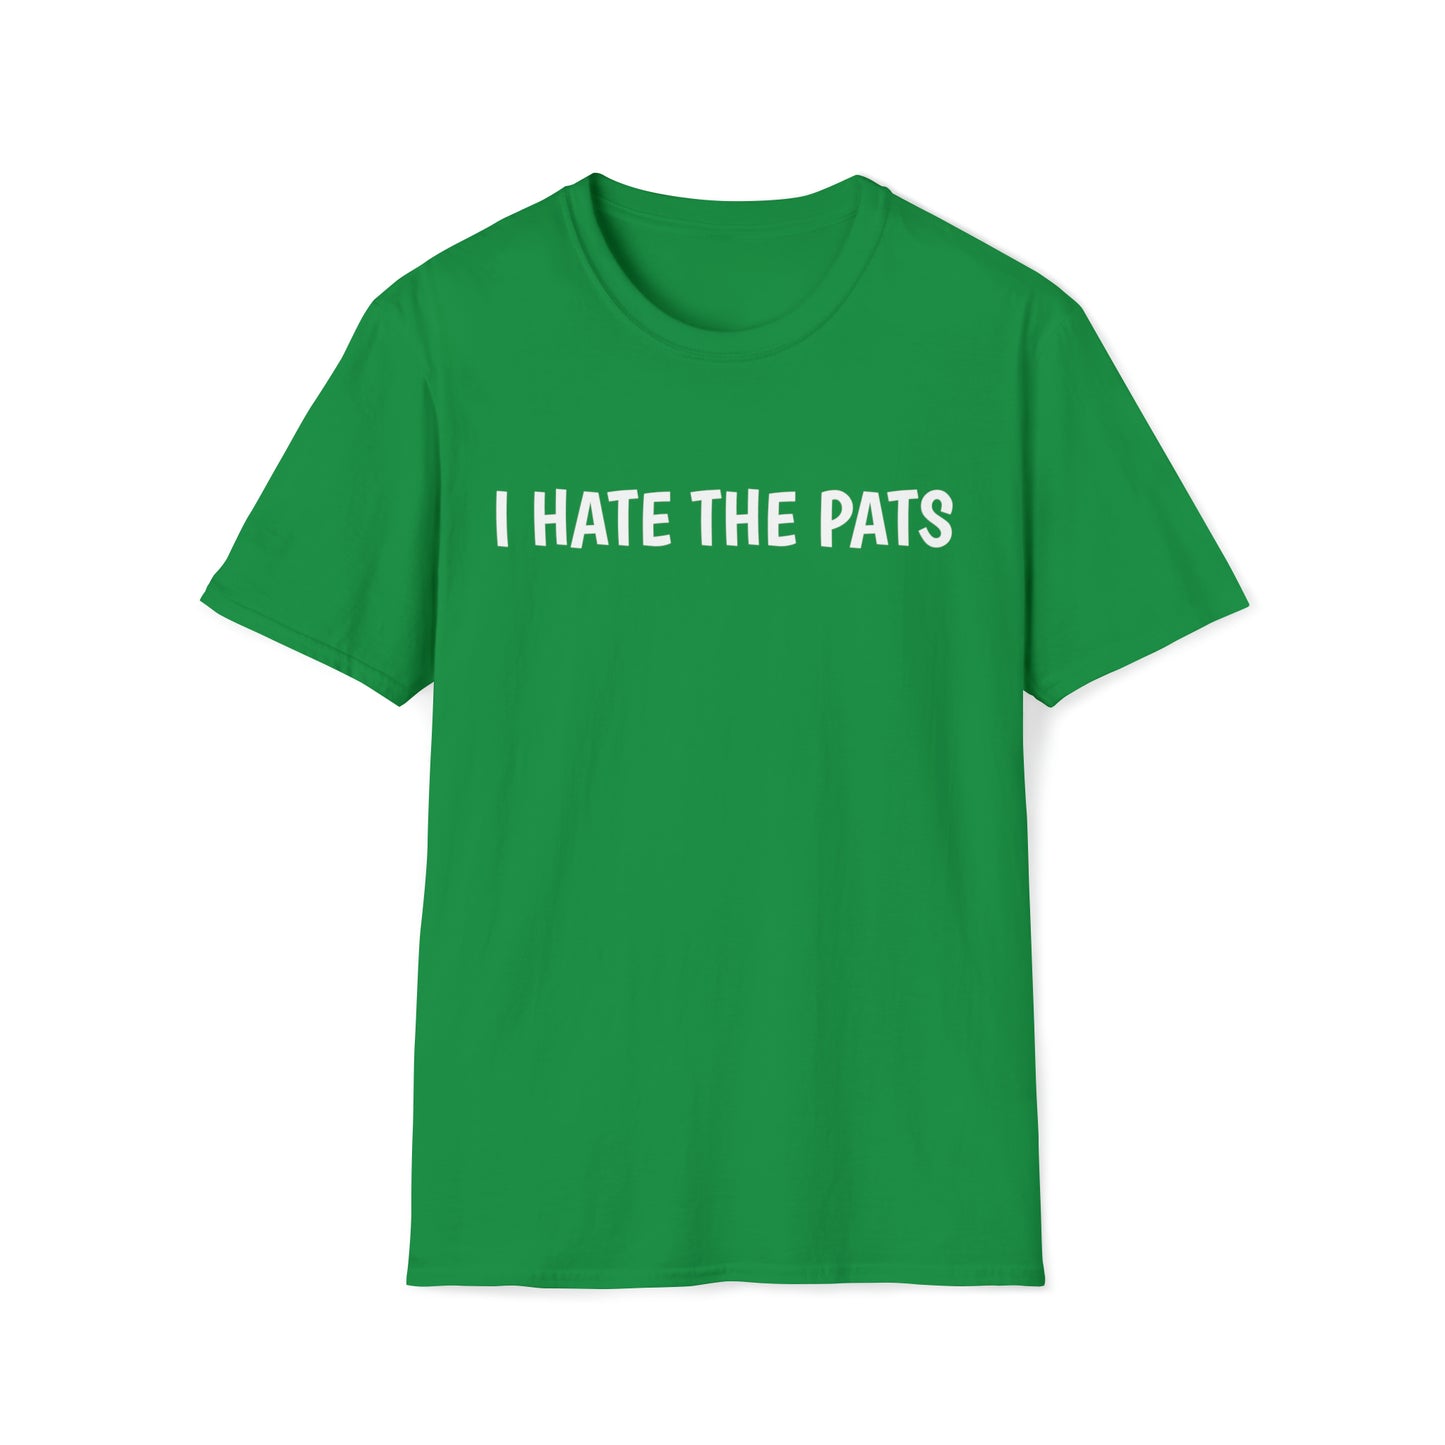 I HATE THE PATS TEE